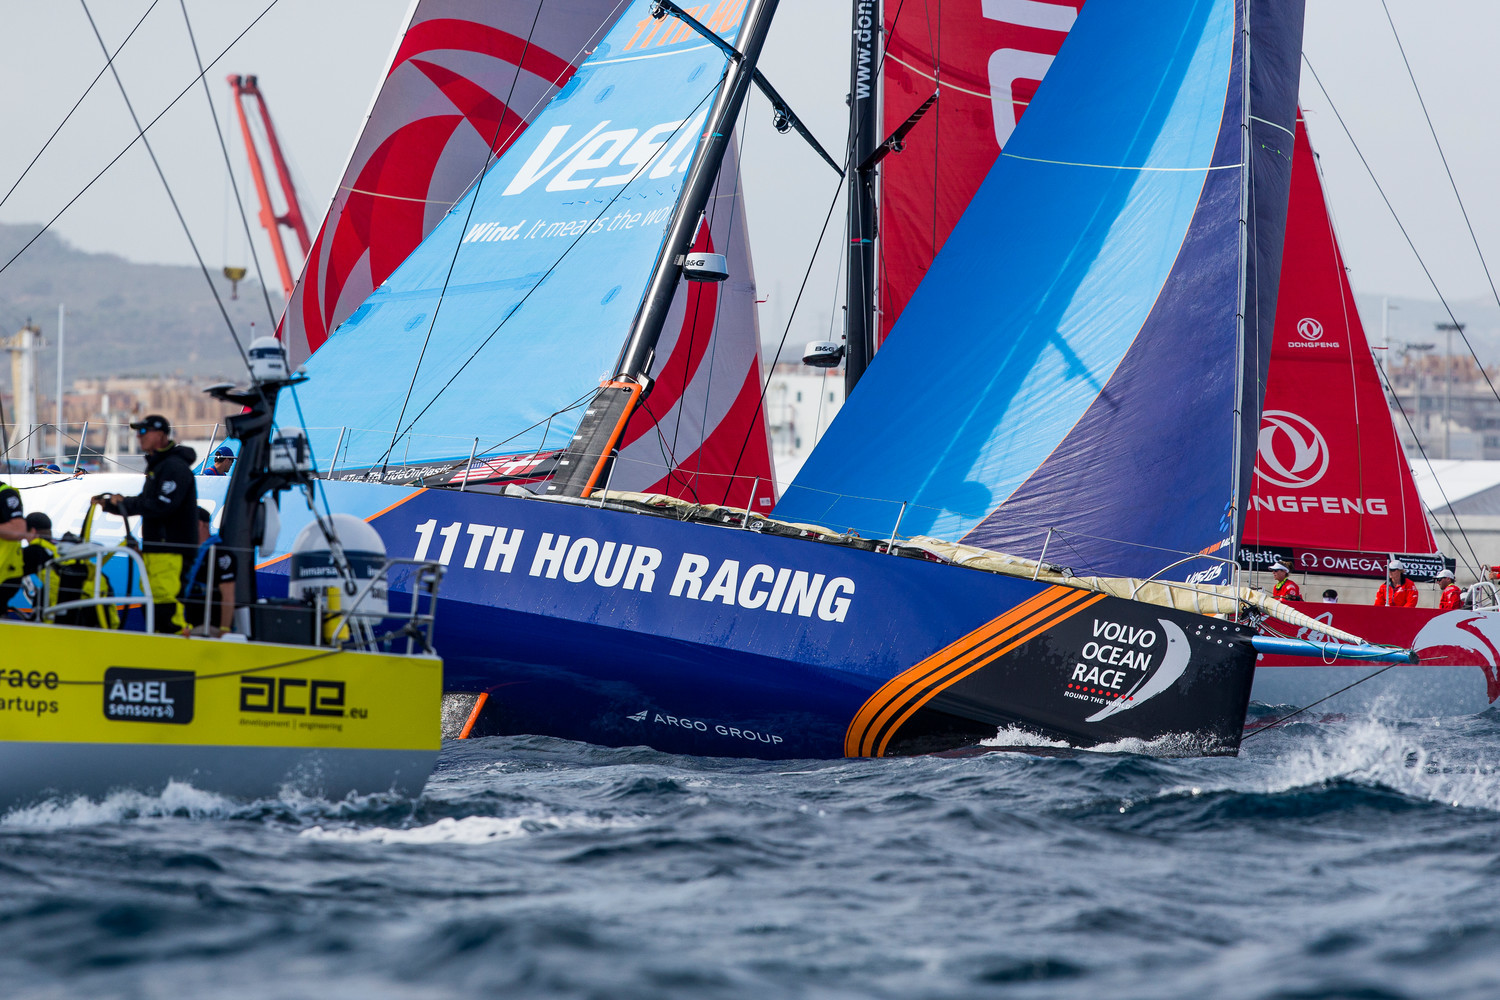 Charlie Enright of Bristol steers Vestas 11th Hour Racing to the Volvo Ocean Race starting line at Alicante, Spain, Sunday at high speed in close quarters. Pedro Martinez/Volvo Ocean Race.